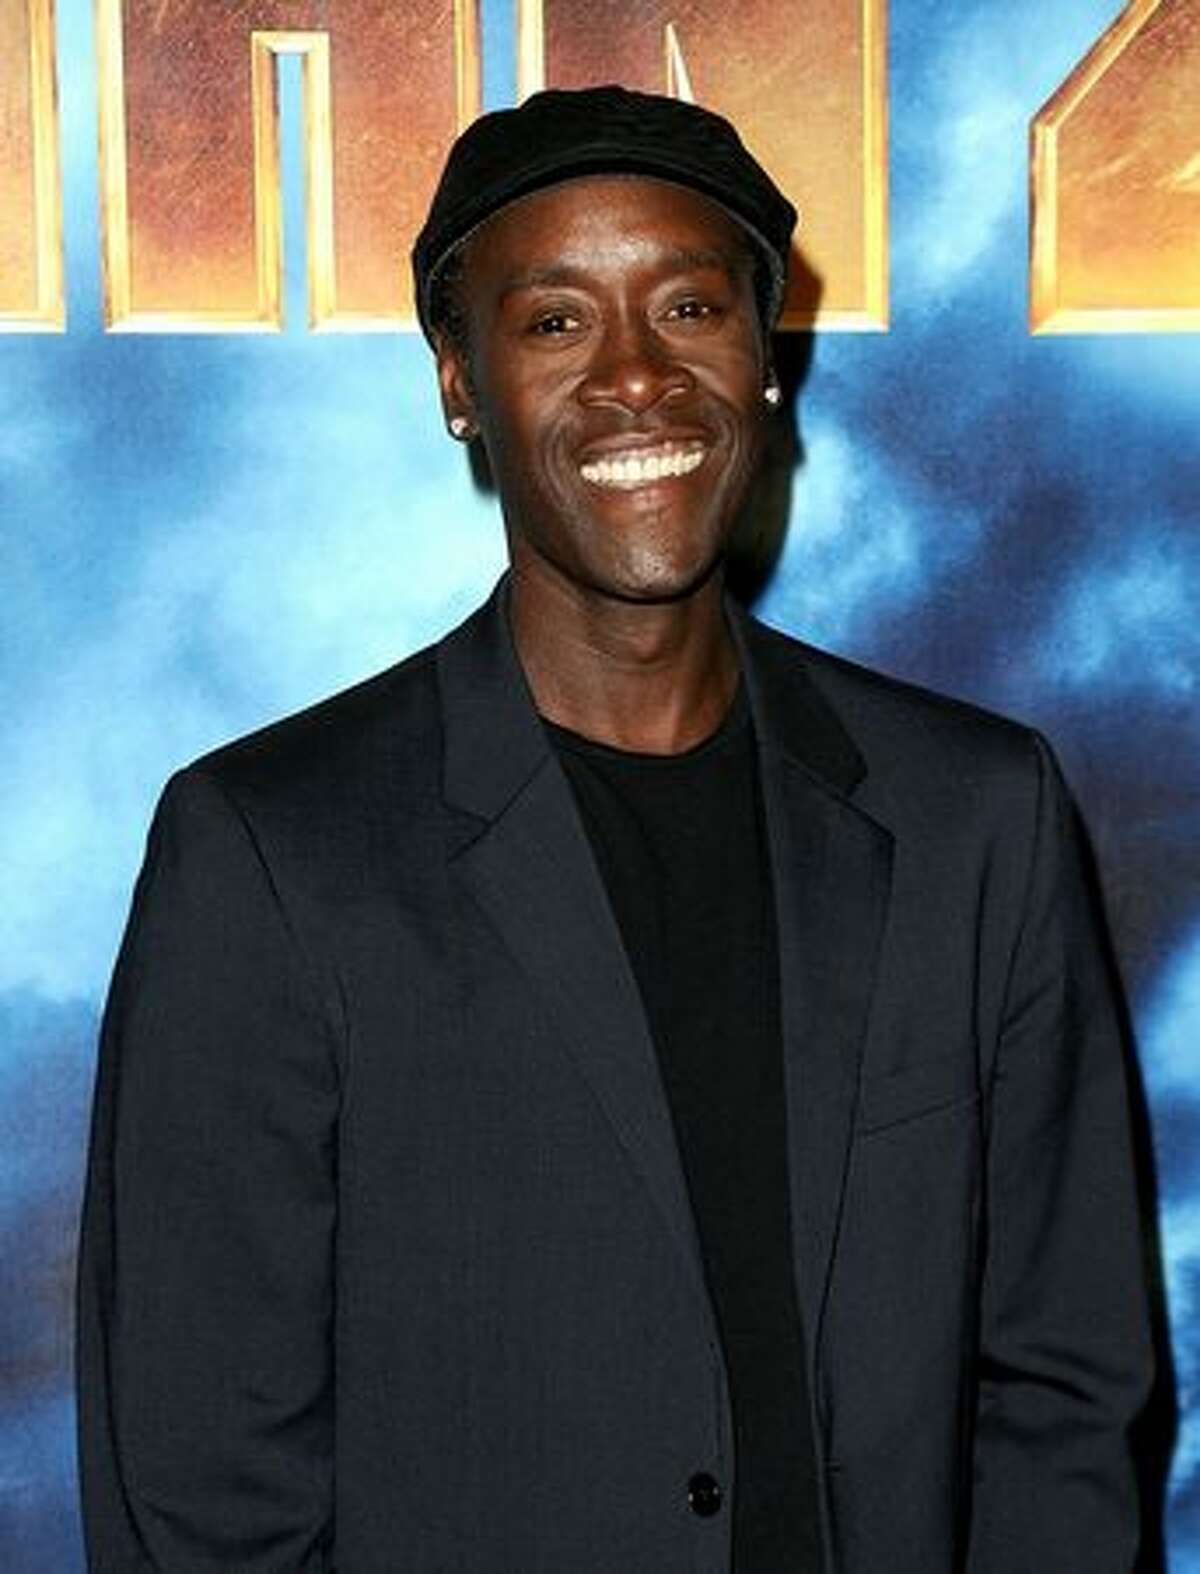 Actor Don Cheadle poses during Paramount Pictures & Marvel Entertainment's "Iron Man 2" photo call held at the Four Seasons Hotel on April 23, 2010 in Los Angeles, California.